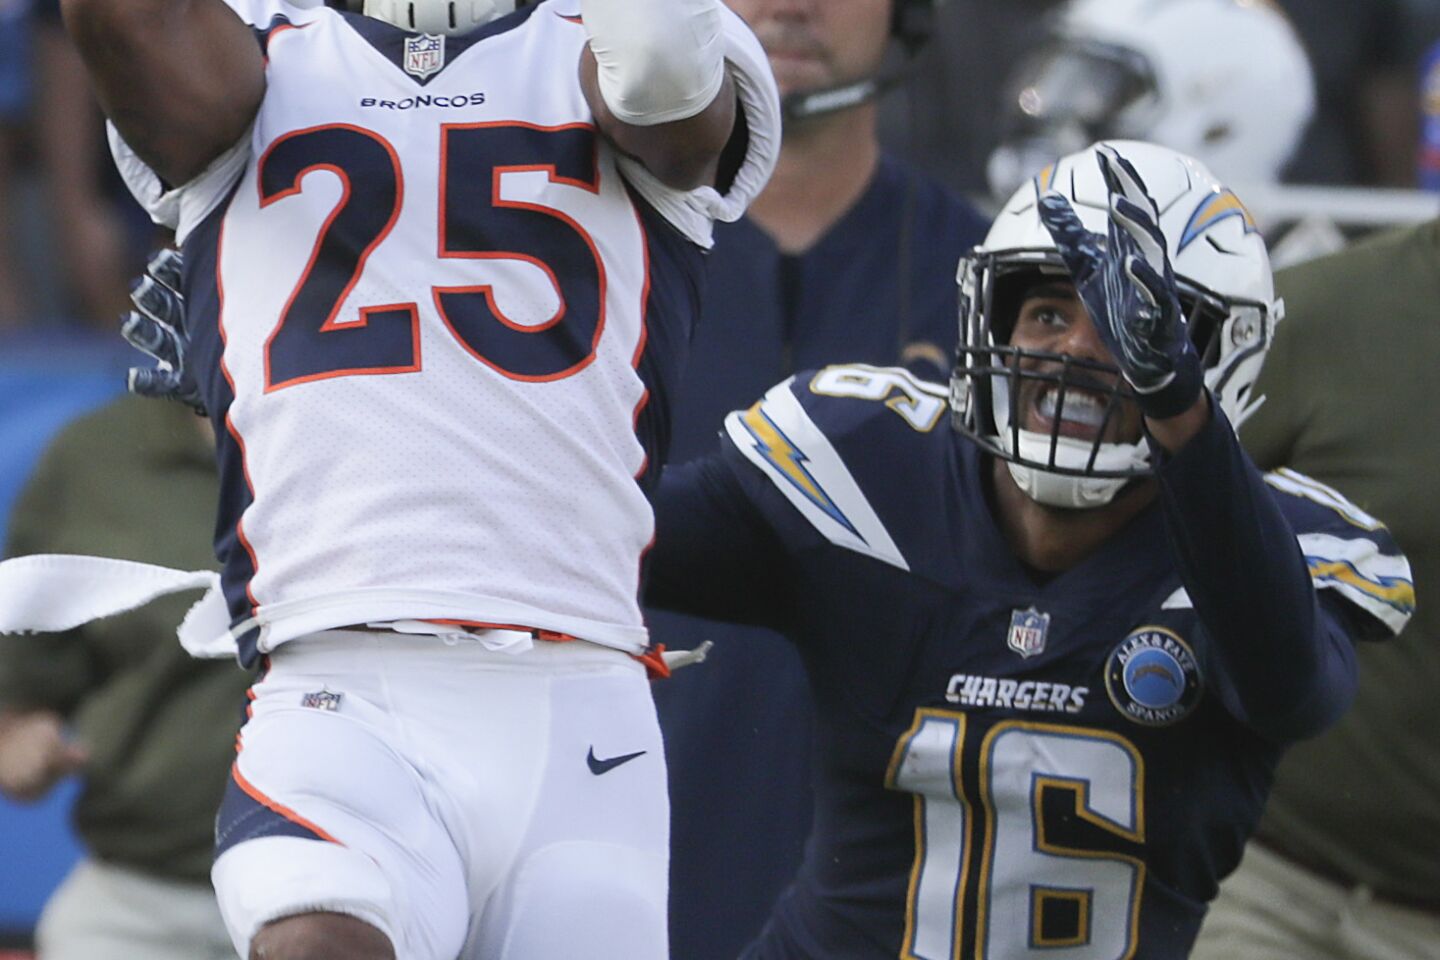 Denver Broncos cornerback Chris Harris Jr. intercepts a pass intended for Chargers receiver Tyrell Williams during second half action at Stubhub Center on Sunday.